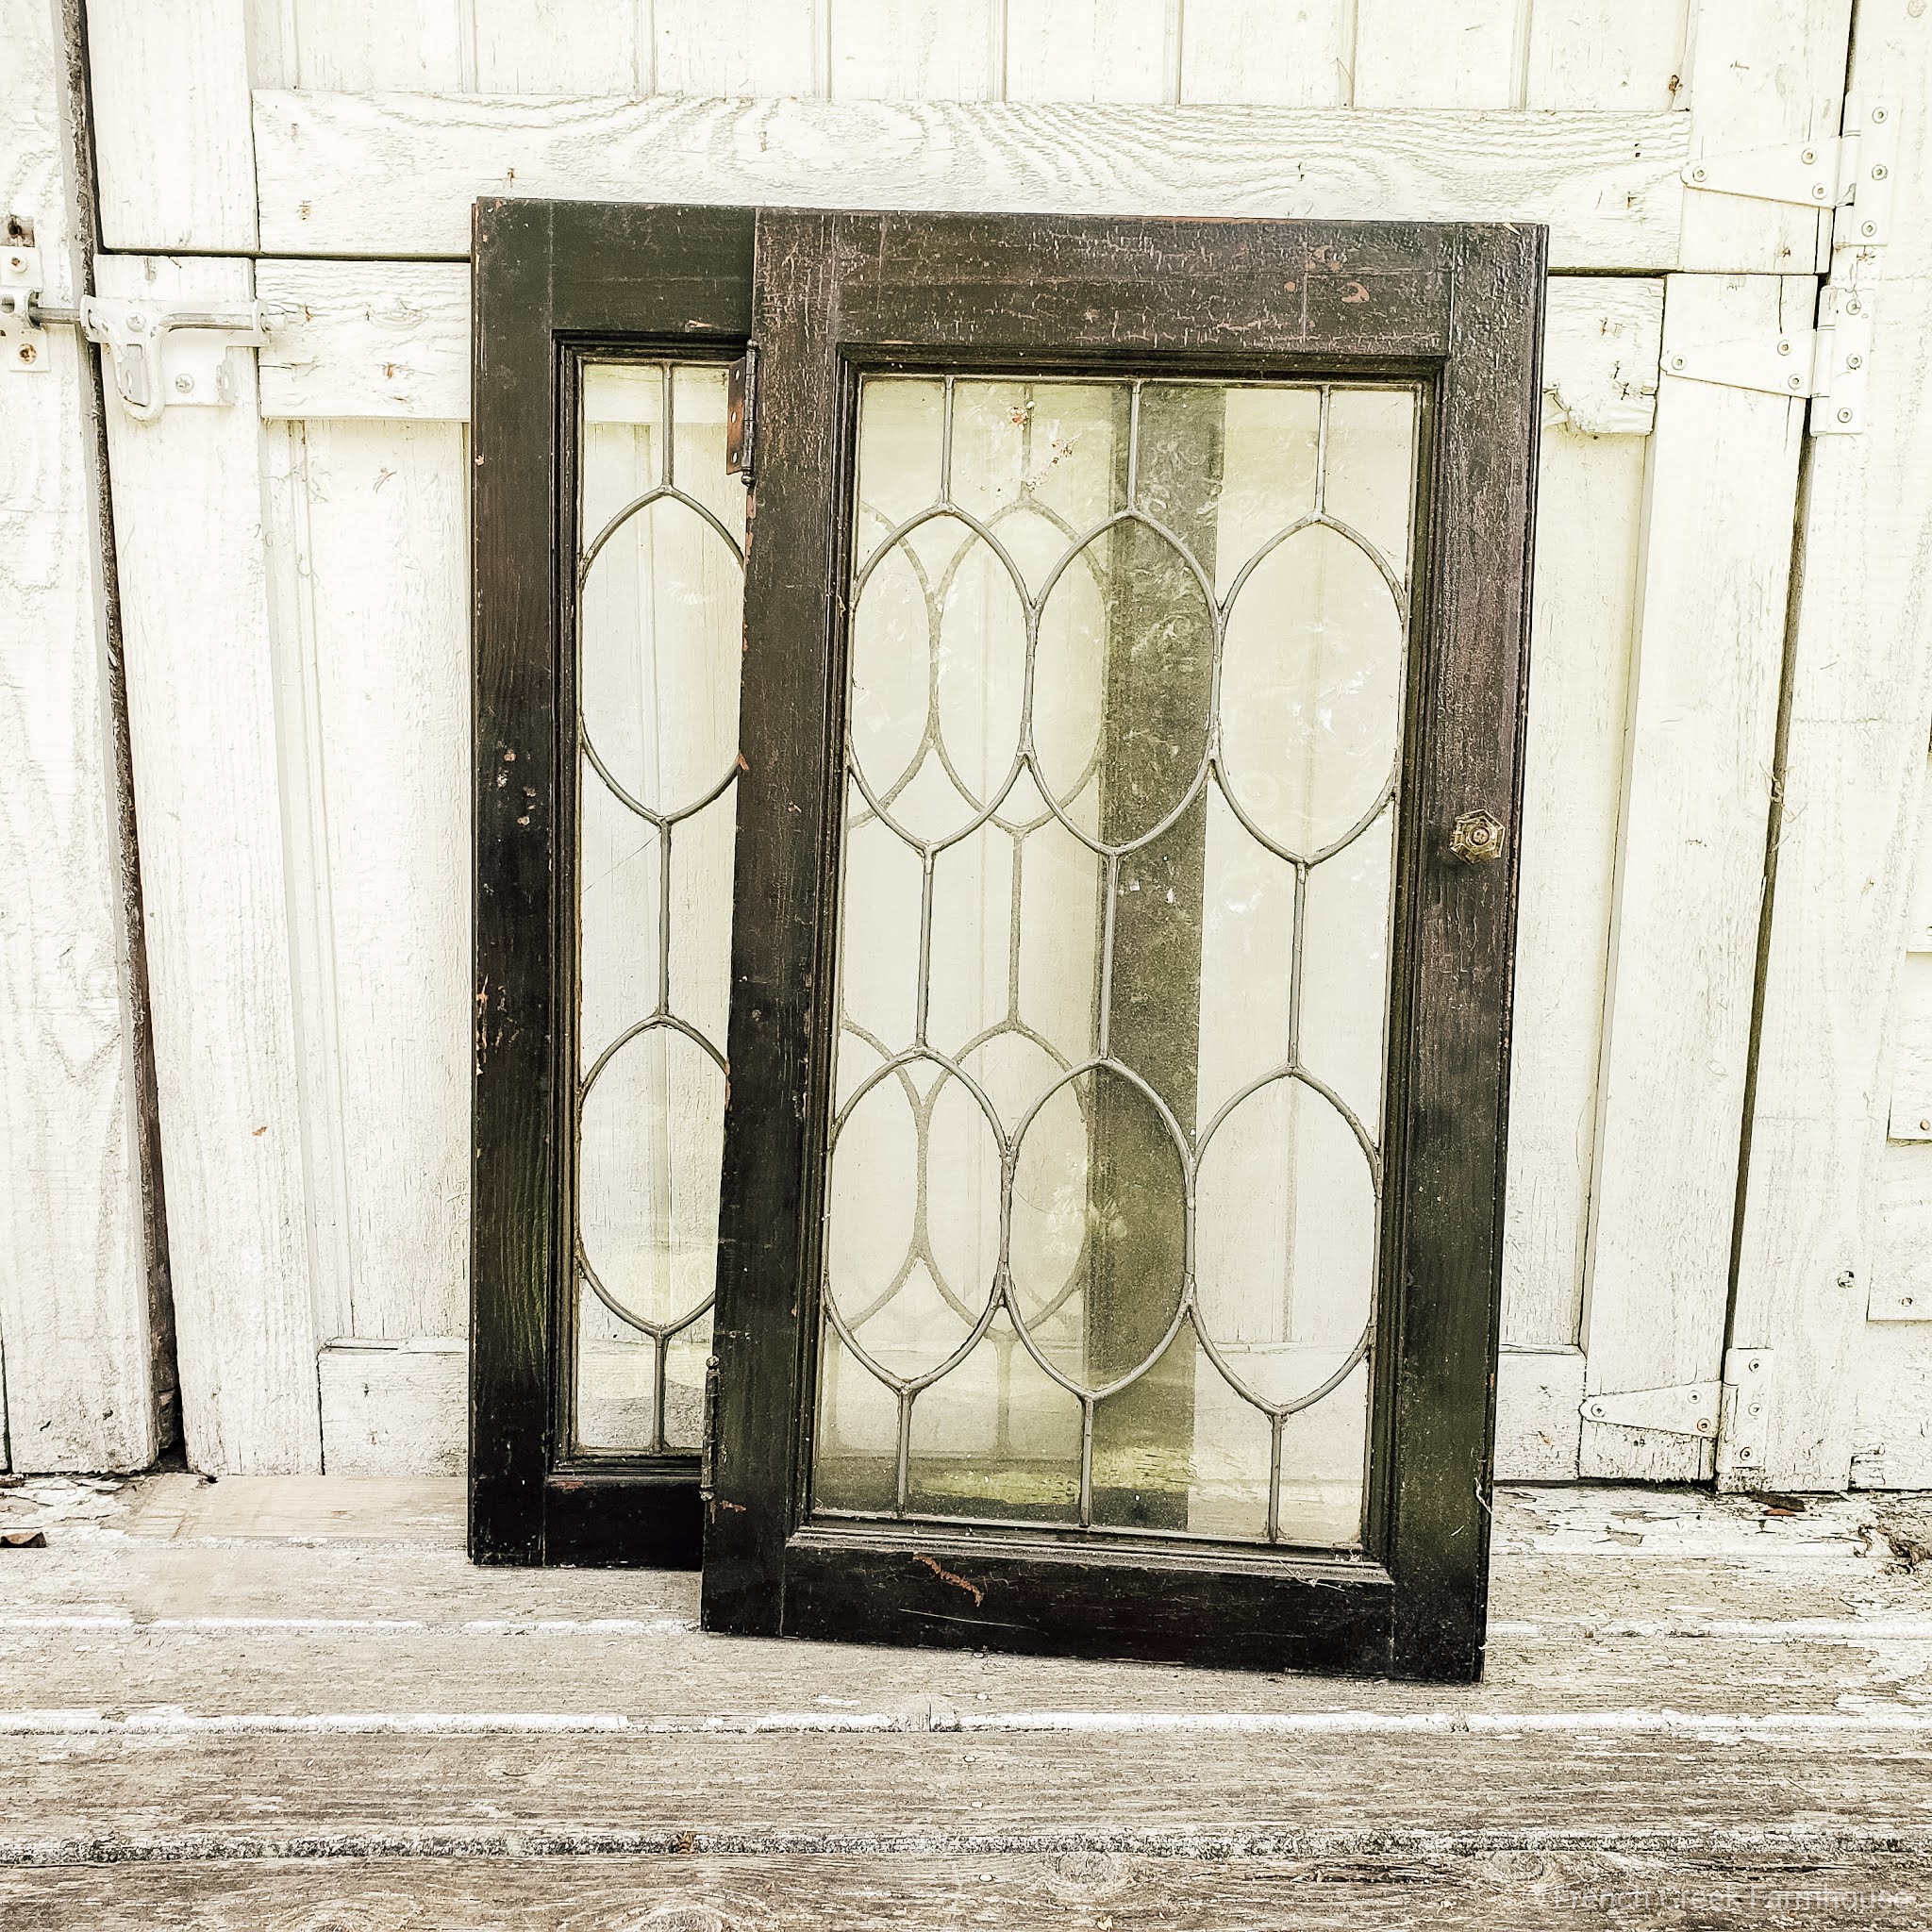 Old windows add a charming vintage aesthetic